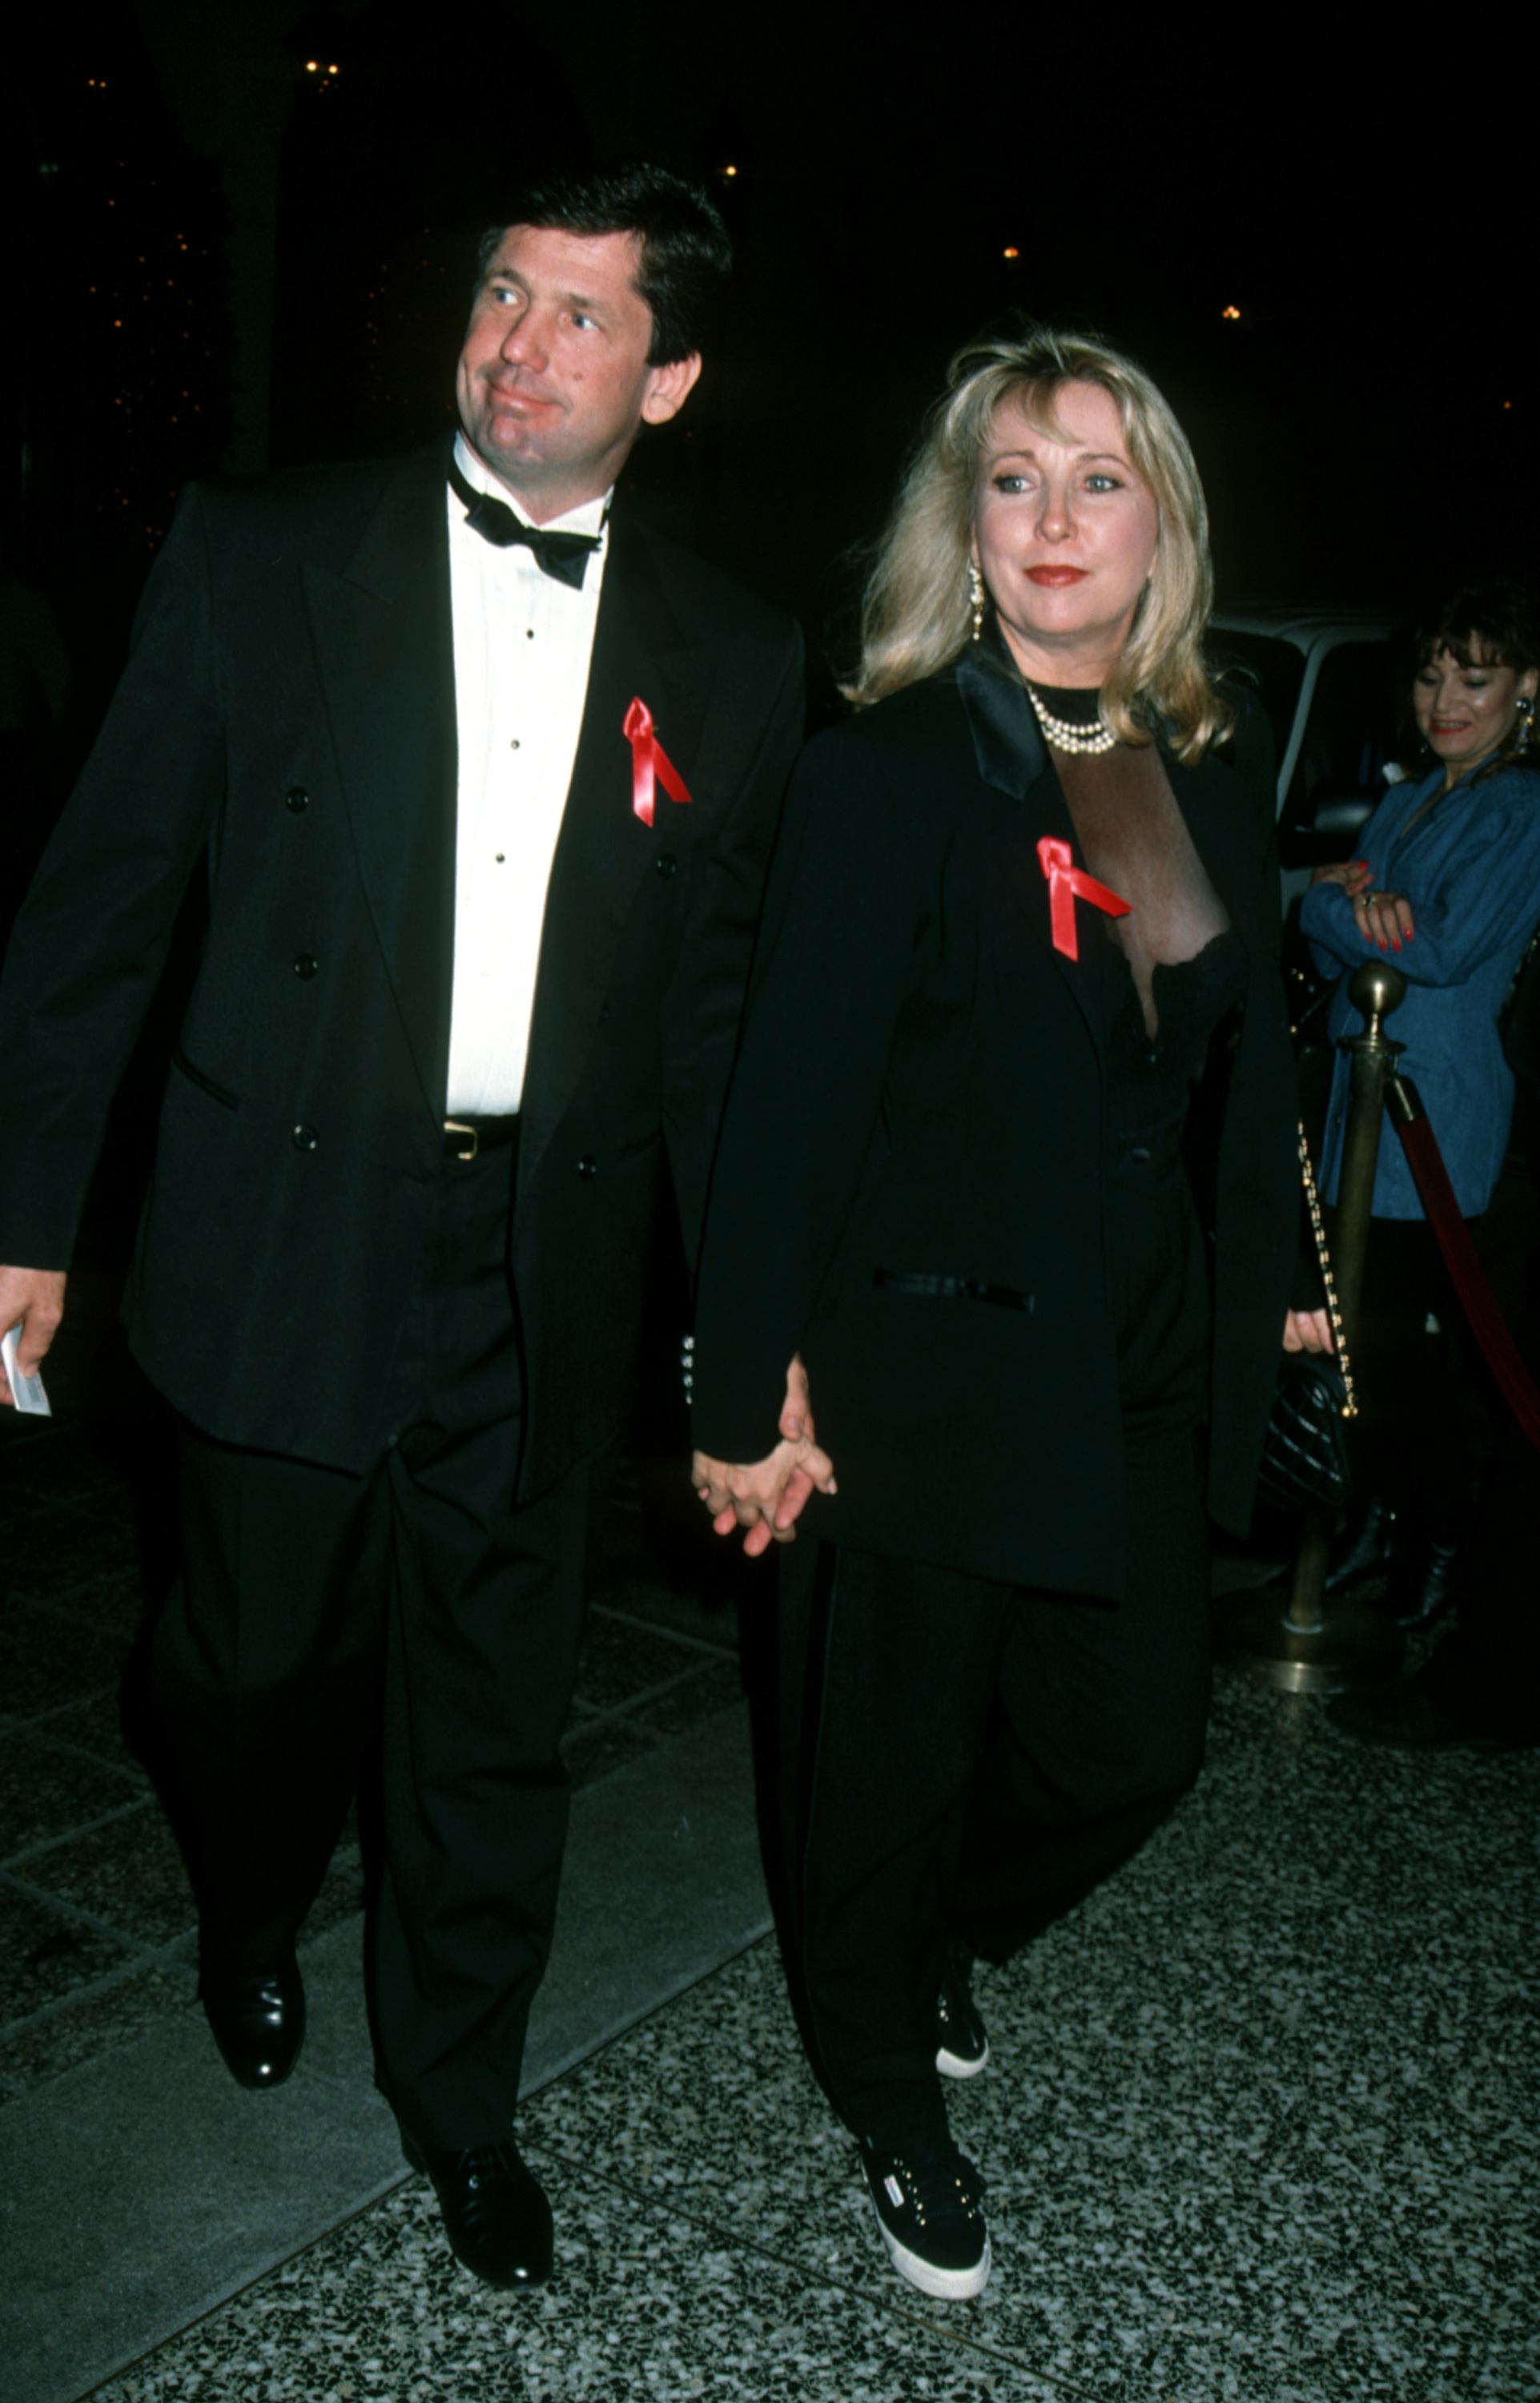 John O'Neil and Teri Garr during American Cancer Society Honors Herbert Ross at Regent Beverly Wilshire Hotel in Beverly Hills on March 16, 1993. | Source: Getty Images